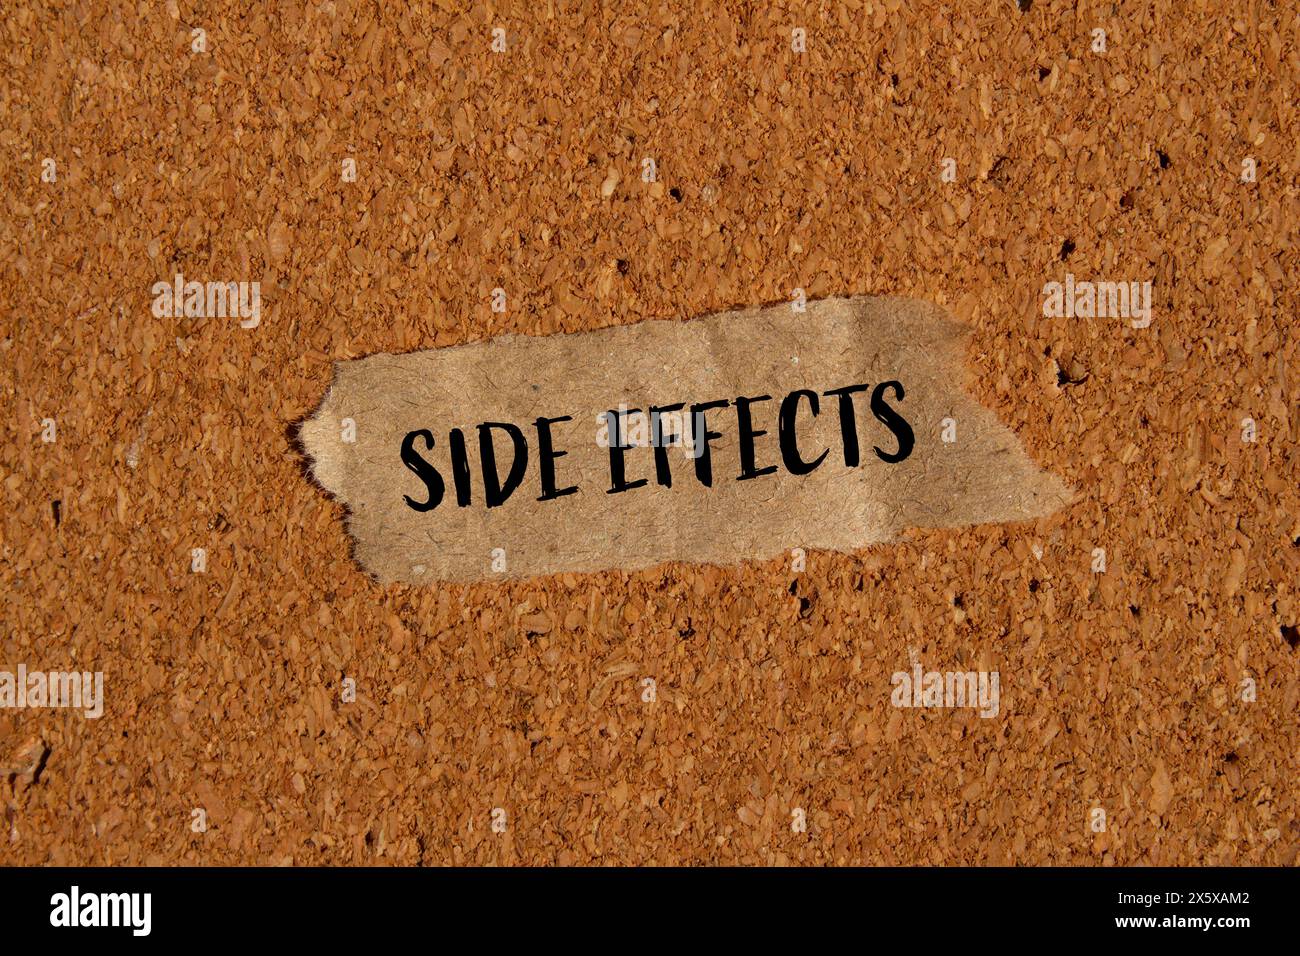 Side effects words written on ripped paper piece with brown background. Conceptual side effects symbol. Copy space. Stock Photo